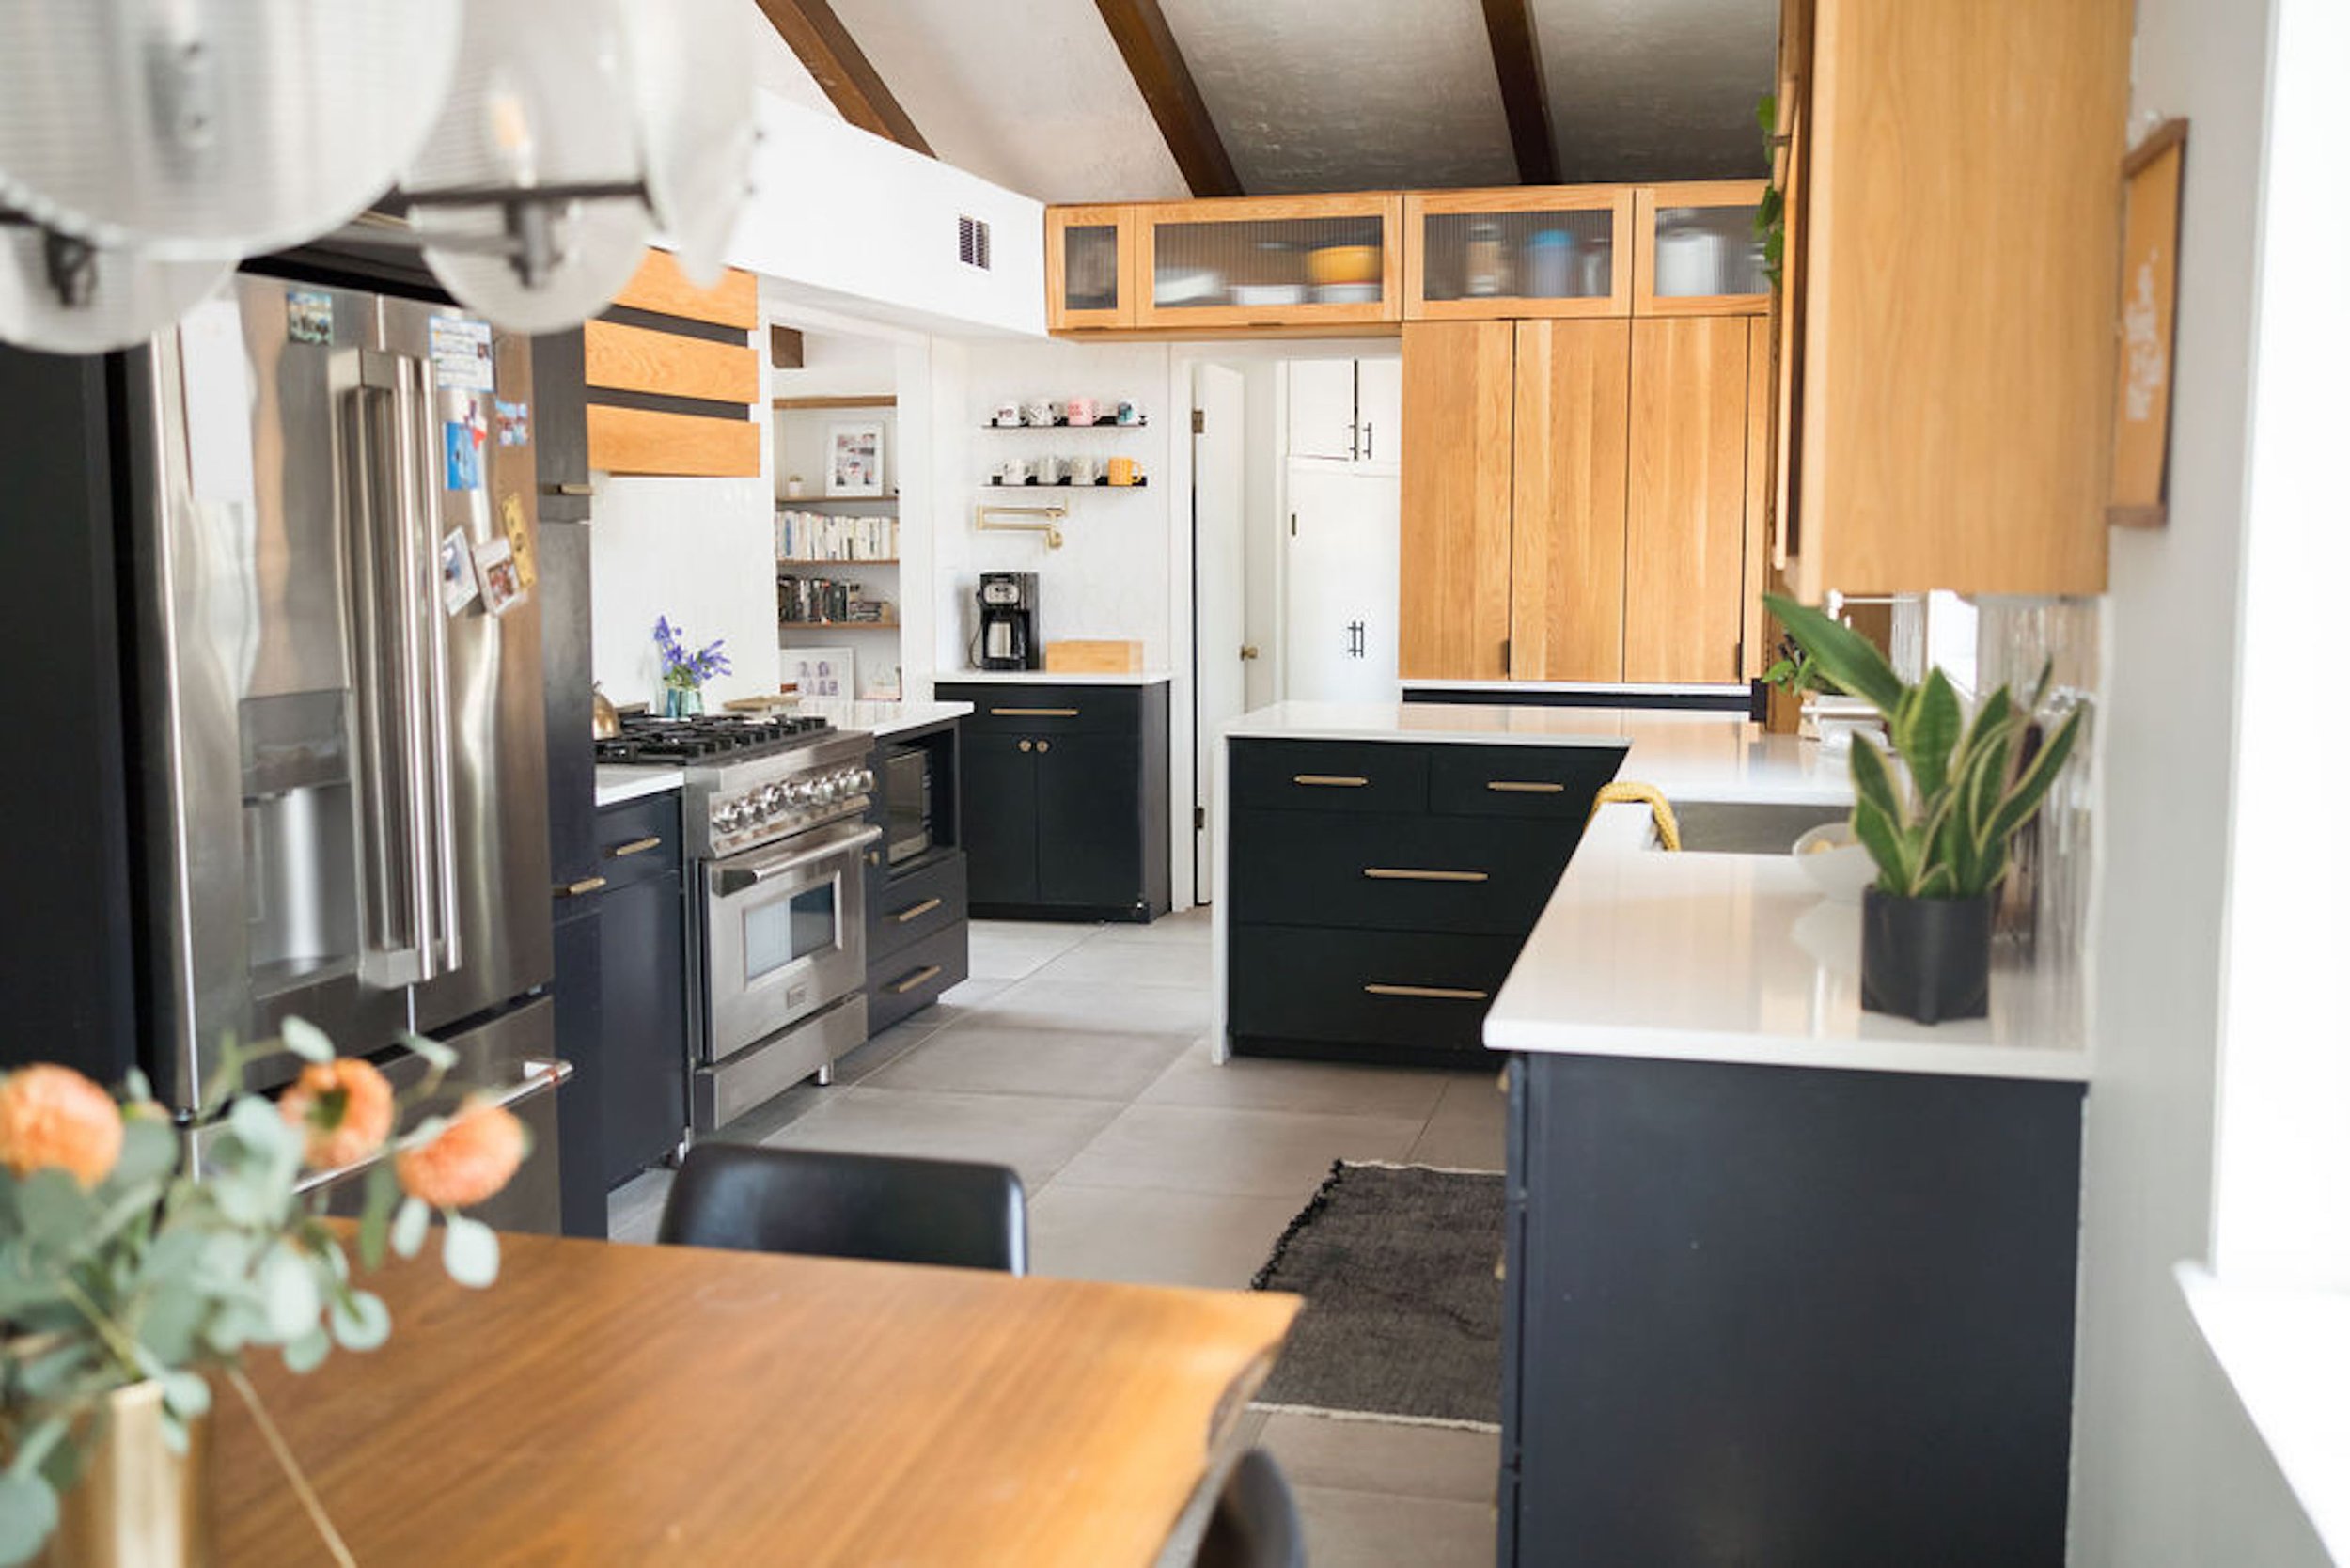 A mid-century modern kitchen remodel reveal.